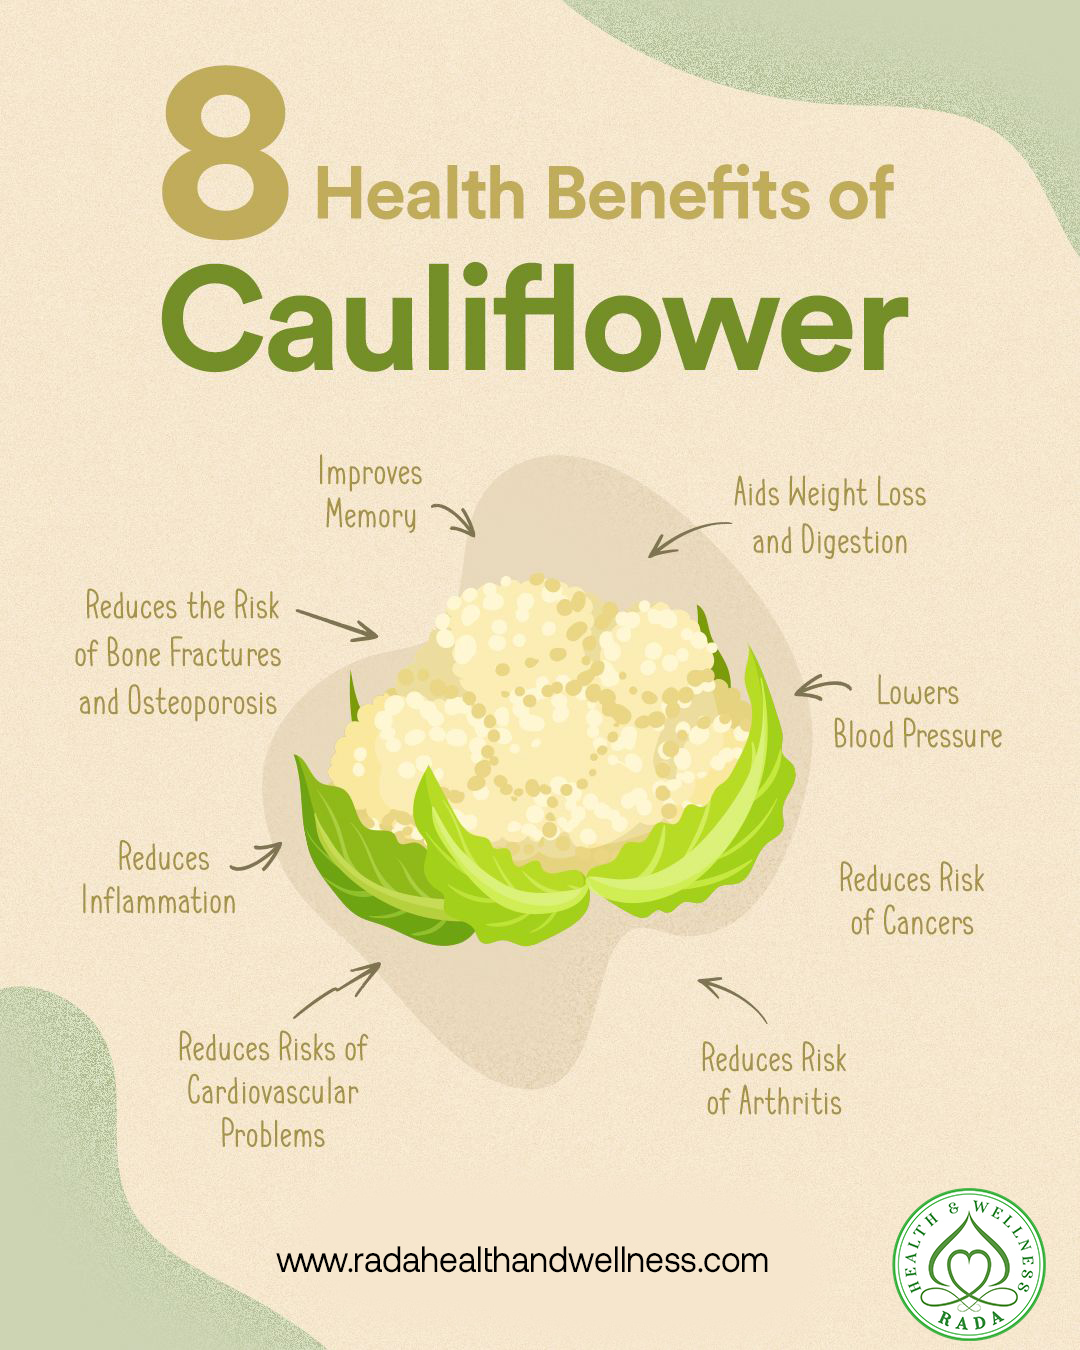 What was once considered a fairly ‘boring’ vegetable that didn’t get much attention, cauliflower was thrown into the spotlight when it was discovered that it was a great low carb, high nutrient substitute for pizza bases, rice, and more.

The Centers for Disease Control and Prevention (CDC) even have cauliflower named 24th on a list of "powerhouse fruits and vegetables."

One cup of raw cauliflower contains just 25 calories and 5 grams of carbohydrate while providing 77% of a person’s daily vitamin C needs, 20% of daily vitamin K needs, and 10% or more of vitamin B6 and folate daily needs.

Additionally, cauliflower is a good source of calcium, magnesium, phosphorus, and potassium.

What does that mean for your health?
8 Health Benefits Of Cauliflower
1. Improves Memory
If you’re finding yourself becoming a bit forgetful or need a brain boost for work or study,  Cauliflower contains choline, which is an essential element for learning and memory.

It also aids in the maintenance of cellular membrane structure and the transmission of nerve impulses.
2. Aids Weight Loss And Digestion 
Being high in fiber and water, cauliflower can aid in relieving constipation and maintaining a healthy digestive tract. The high fiber content can also assist in improving insulin sensitivity which can enhance weight loss for people with obesity.
3. Lowers Blood Pressure 
Once again the high-fiber content of cauliflower benefits the consumer by helping to lower blood pressure and cholesterol levels.
4. Reduces Inflammation 
Eating whole foods and foods that are high in fiber, such as cauliflower, can help regulate the immune system and reduce inflammation.
5. Reduces Risks Of Cardiovascular Problems 
With cauliflower’s ability to reduce inflammation, this in-turn helps alleviate inflammation-related conditions such as cardiovascular disease, diabetes, cancer, and obesity.
6. Reduces The Risk Of Bone Fractures And Osteoporosis 
Because cauliflower contains high levels of Vitamin K, it can support healthy bones by improving calcium absorption.
7. Reduces Risk Of Cancers 
Studies have found anti-carcinogenic properties in cauliflower, as well as others in the brassica family, which can reduce the risk of cancers by helping to prevent cellular mutations and reduce oxidative stress from free radicals.

Cauliflower consumption appears to be most beneficial for lung, stomach, colon, and rectal cancer.
8. Reduces Risk Of Arthritis 
Through its anti-inflammatory properties and the antioxidants present in cauliflower, eating this vegetable can reduce inflammation of the joints (arthritis).